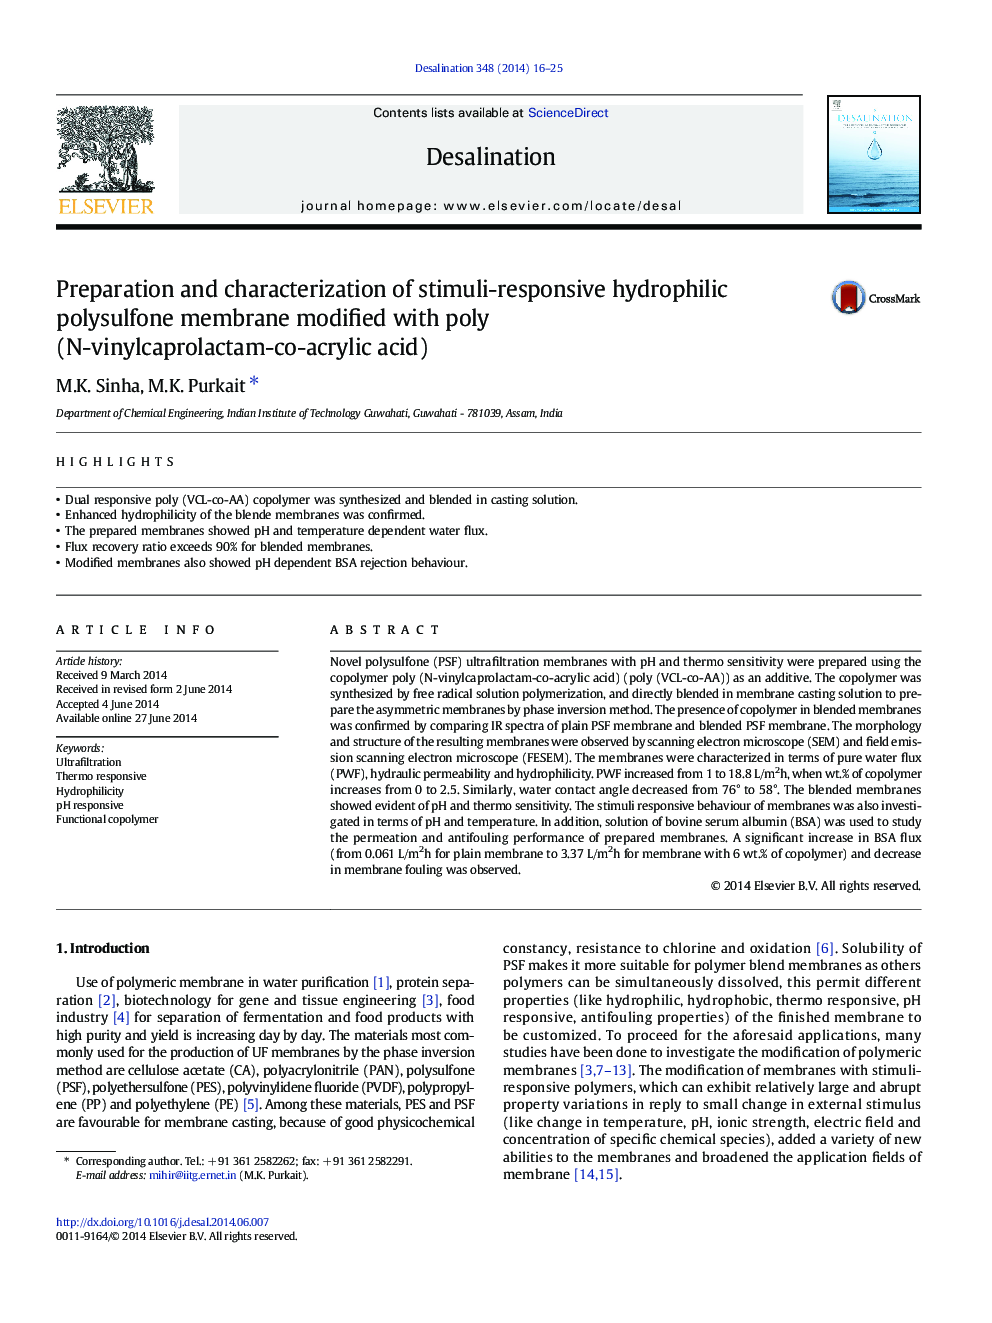 Preparation and characterization of stimuli-responsive hydrophilic polysulfone membrane modified with poly (N-vinylcaprolactam-co-acrylic acid)